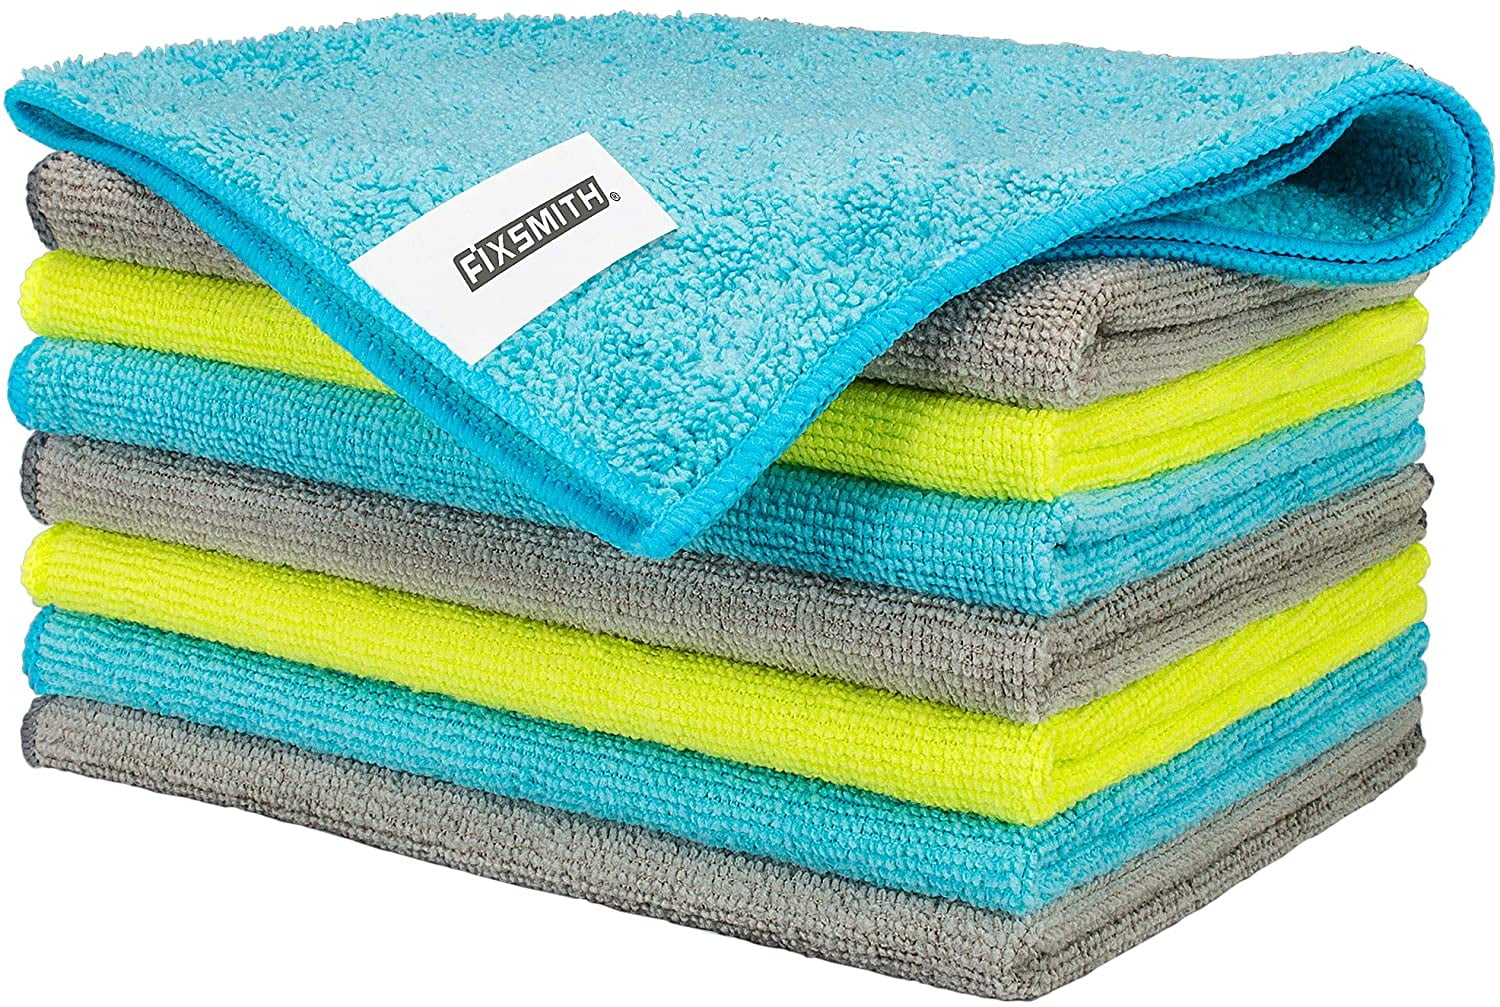 12 Pack Goza Towels Microfiber Towel Cleaning Cloths All-Purpose 16"x16" 